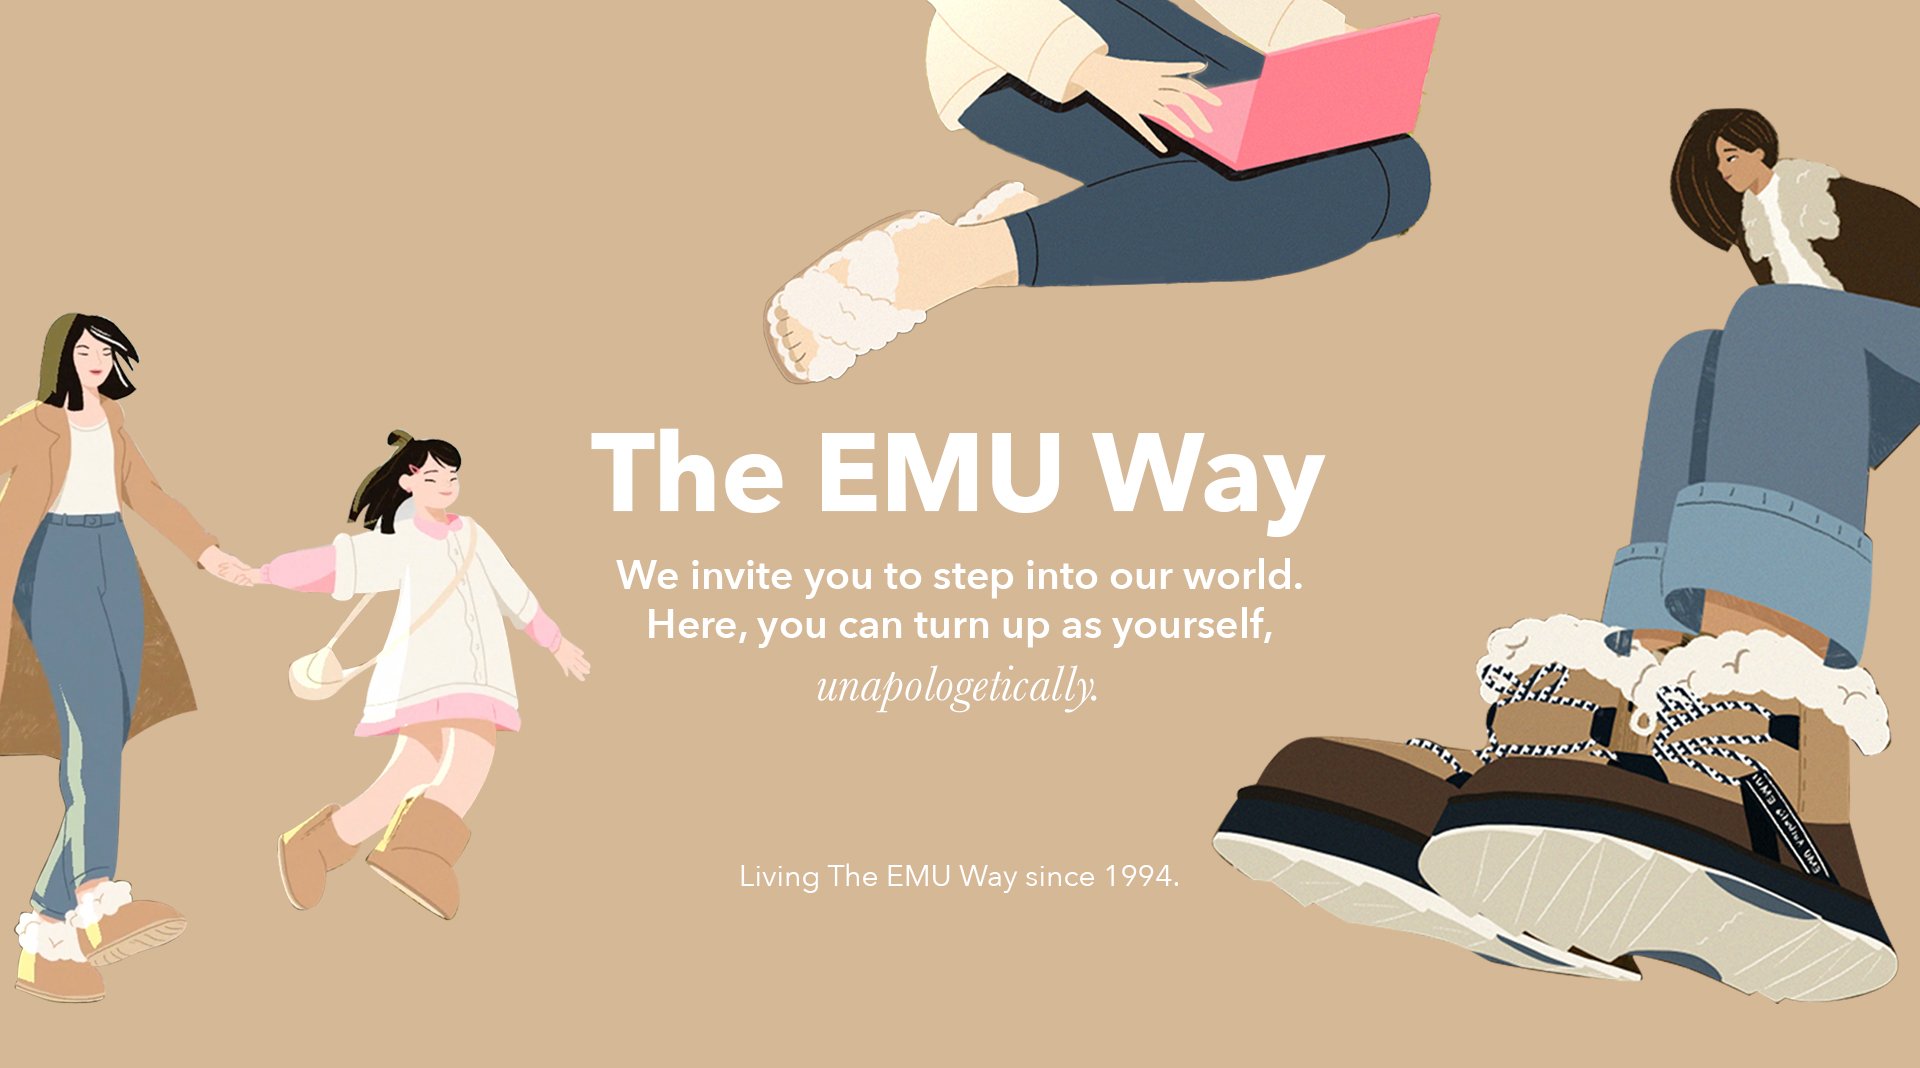 Text reads, The EMU Way. We invite you to step into our world. Here, you can turn up as yourself, unapologetically. Living The EMU Way since 1994.